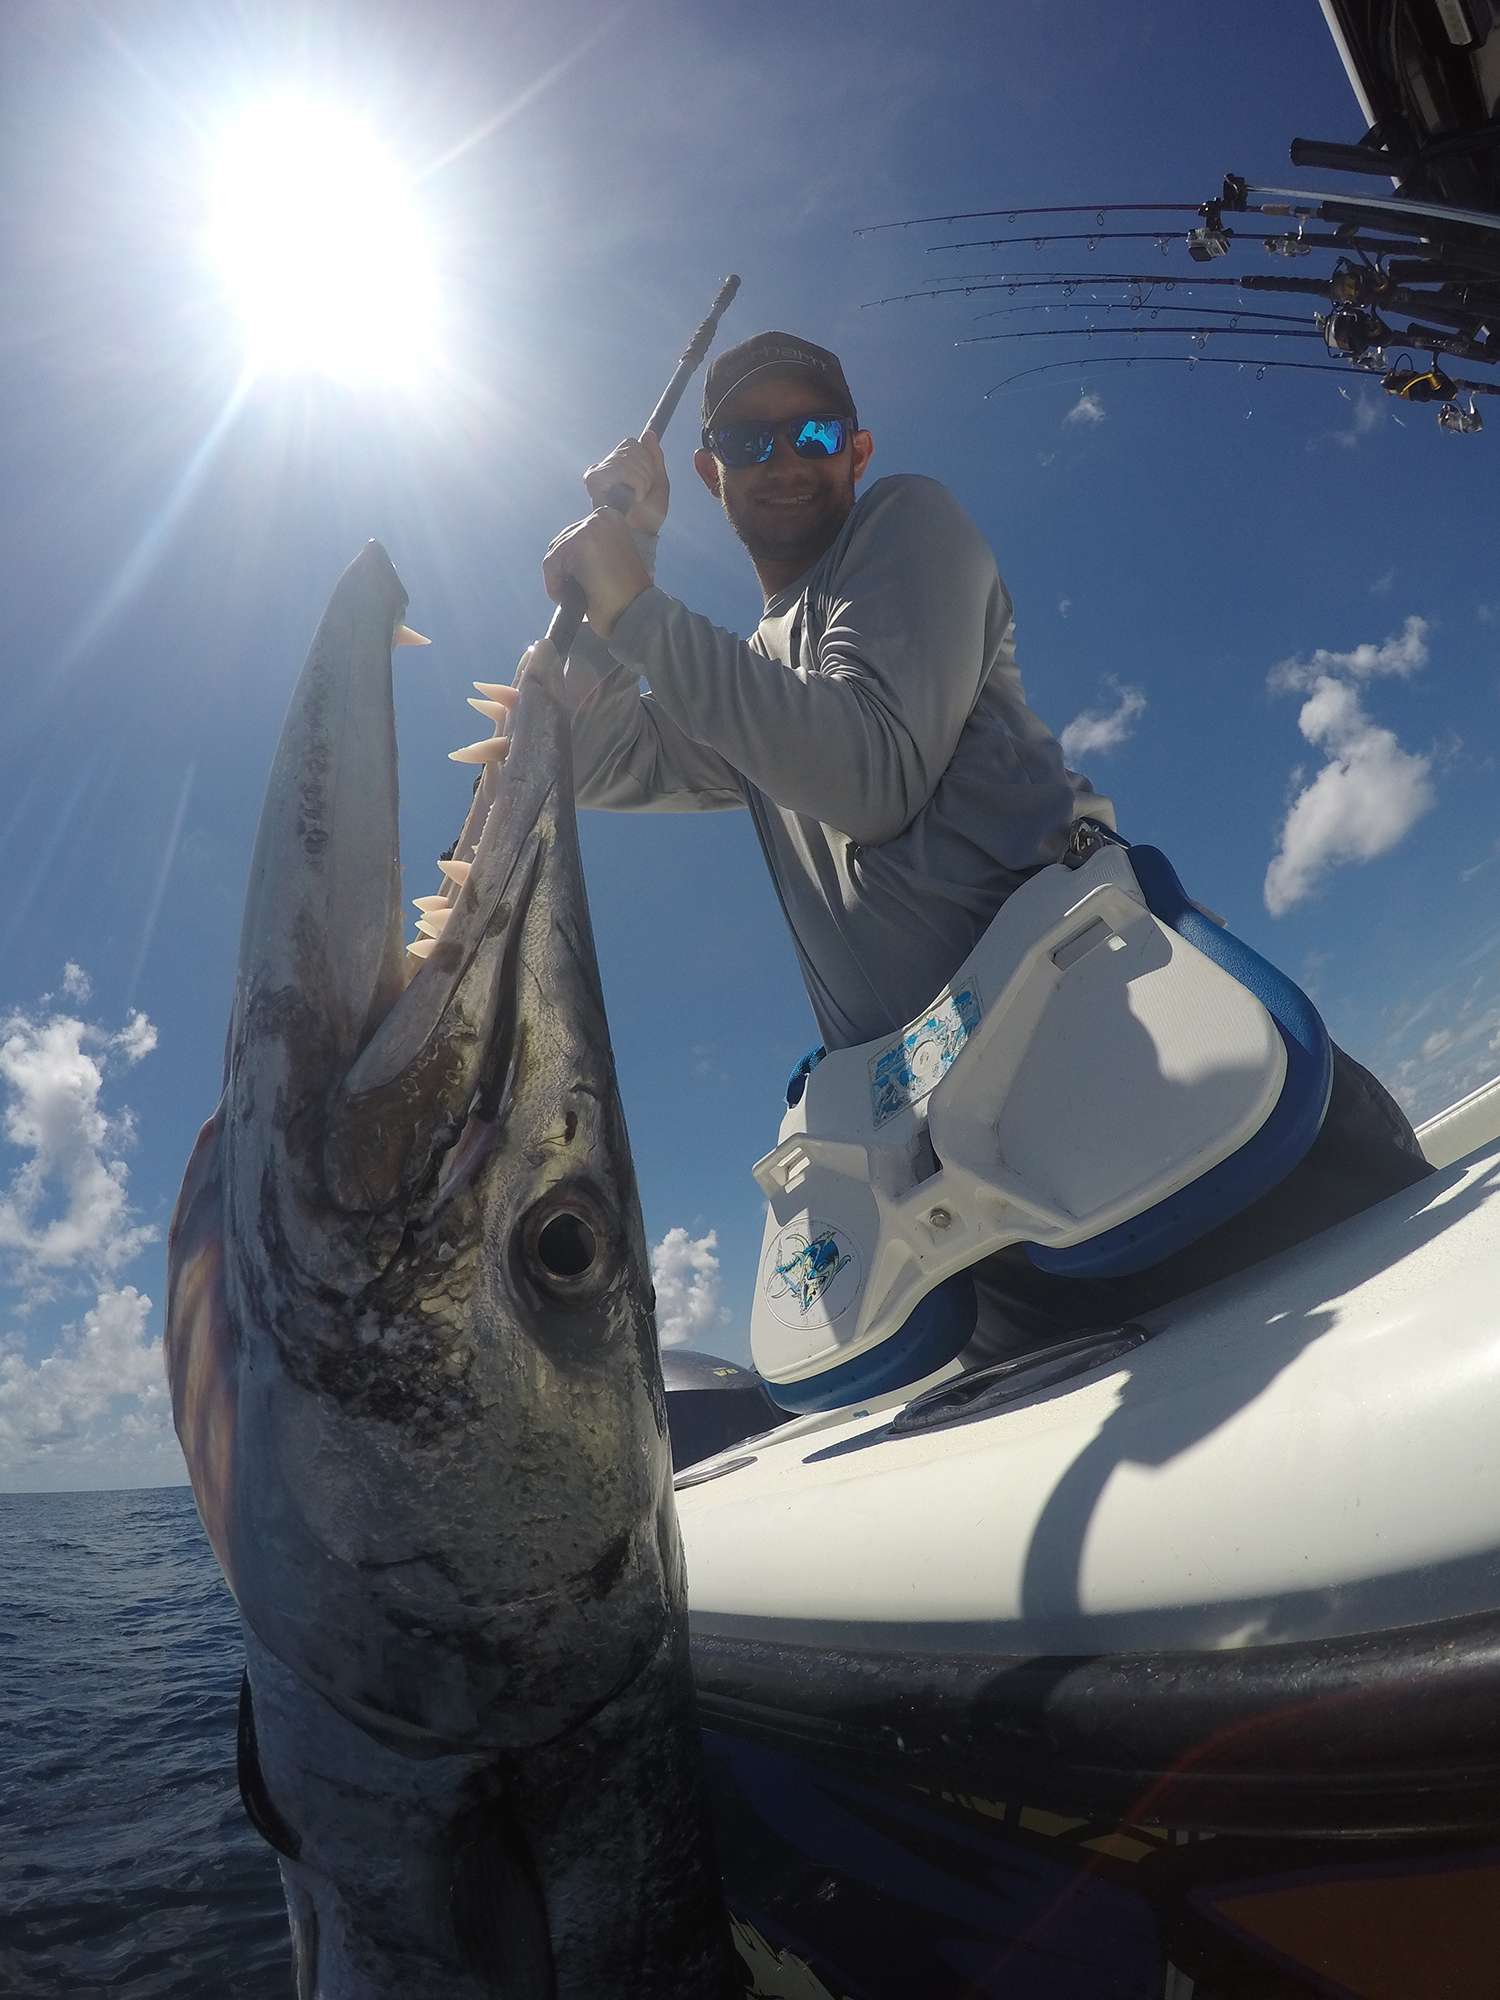 Lee gets a vicious hit on the surface and the fish is definitely not a snapper. When he gets it to the boat, he learns that a barracuda was responsible.